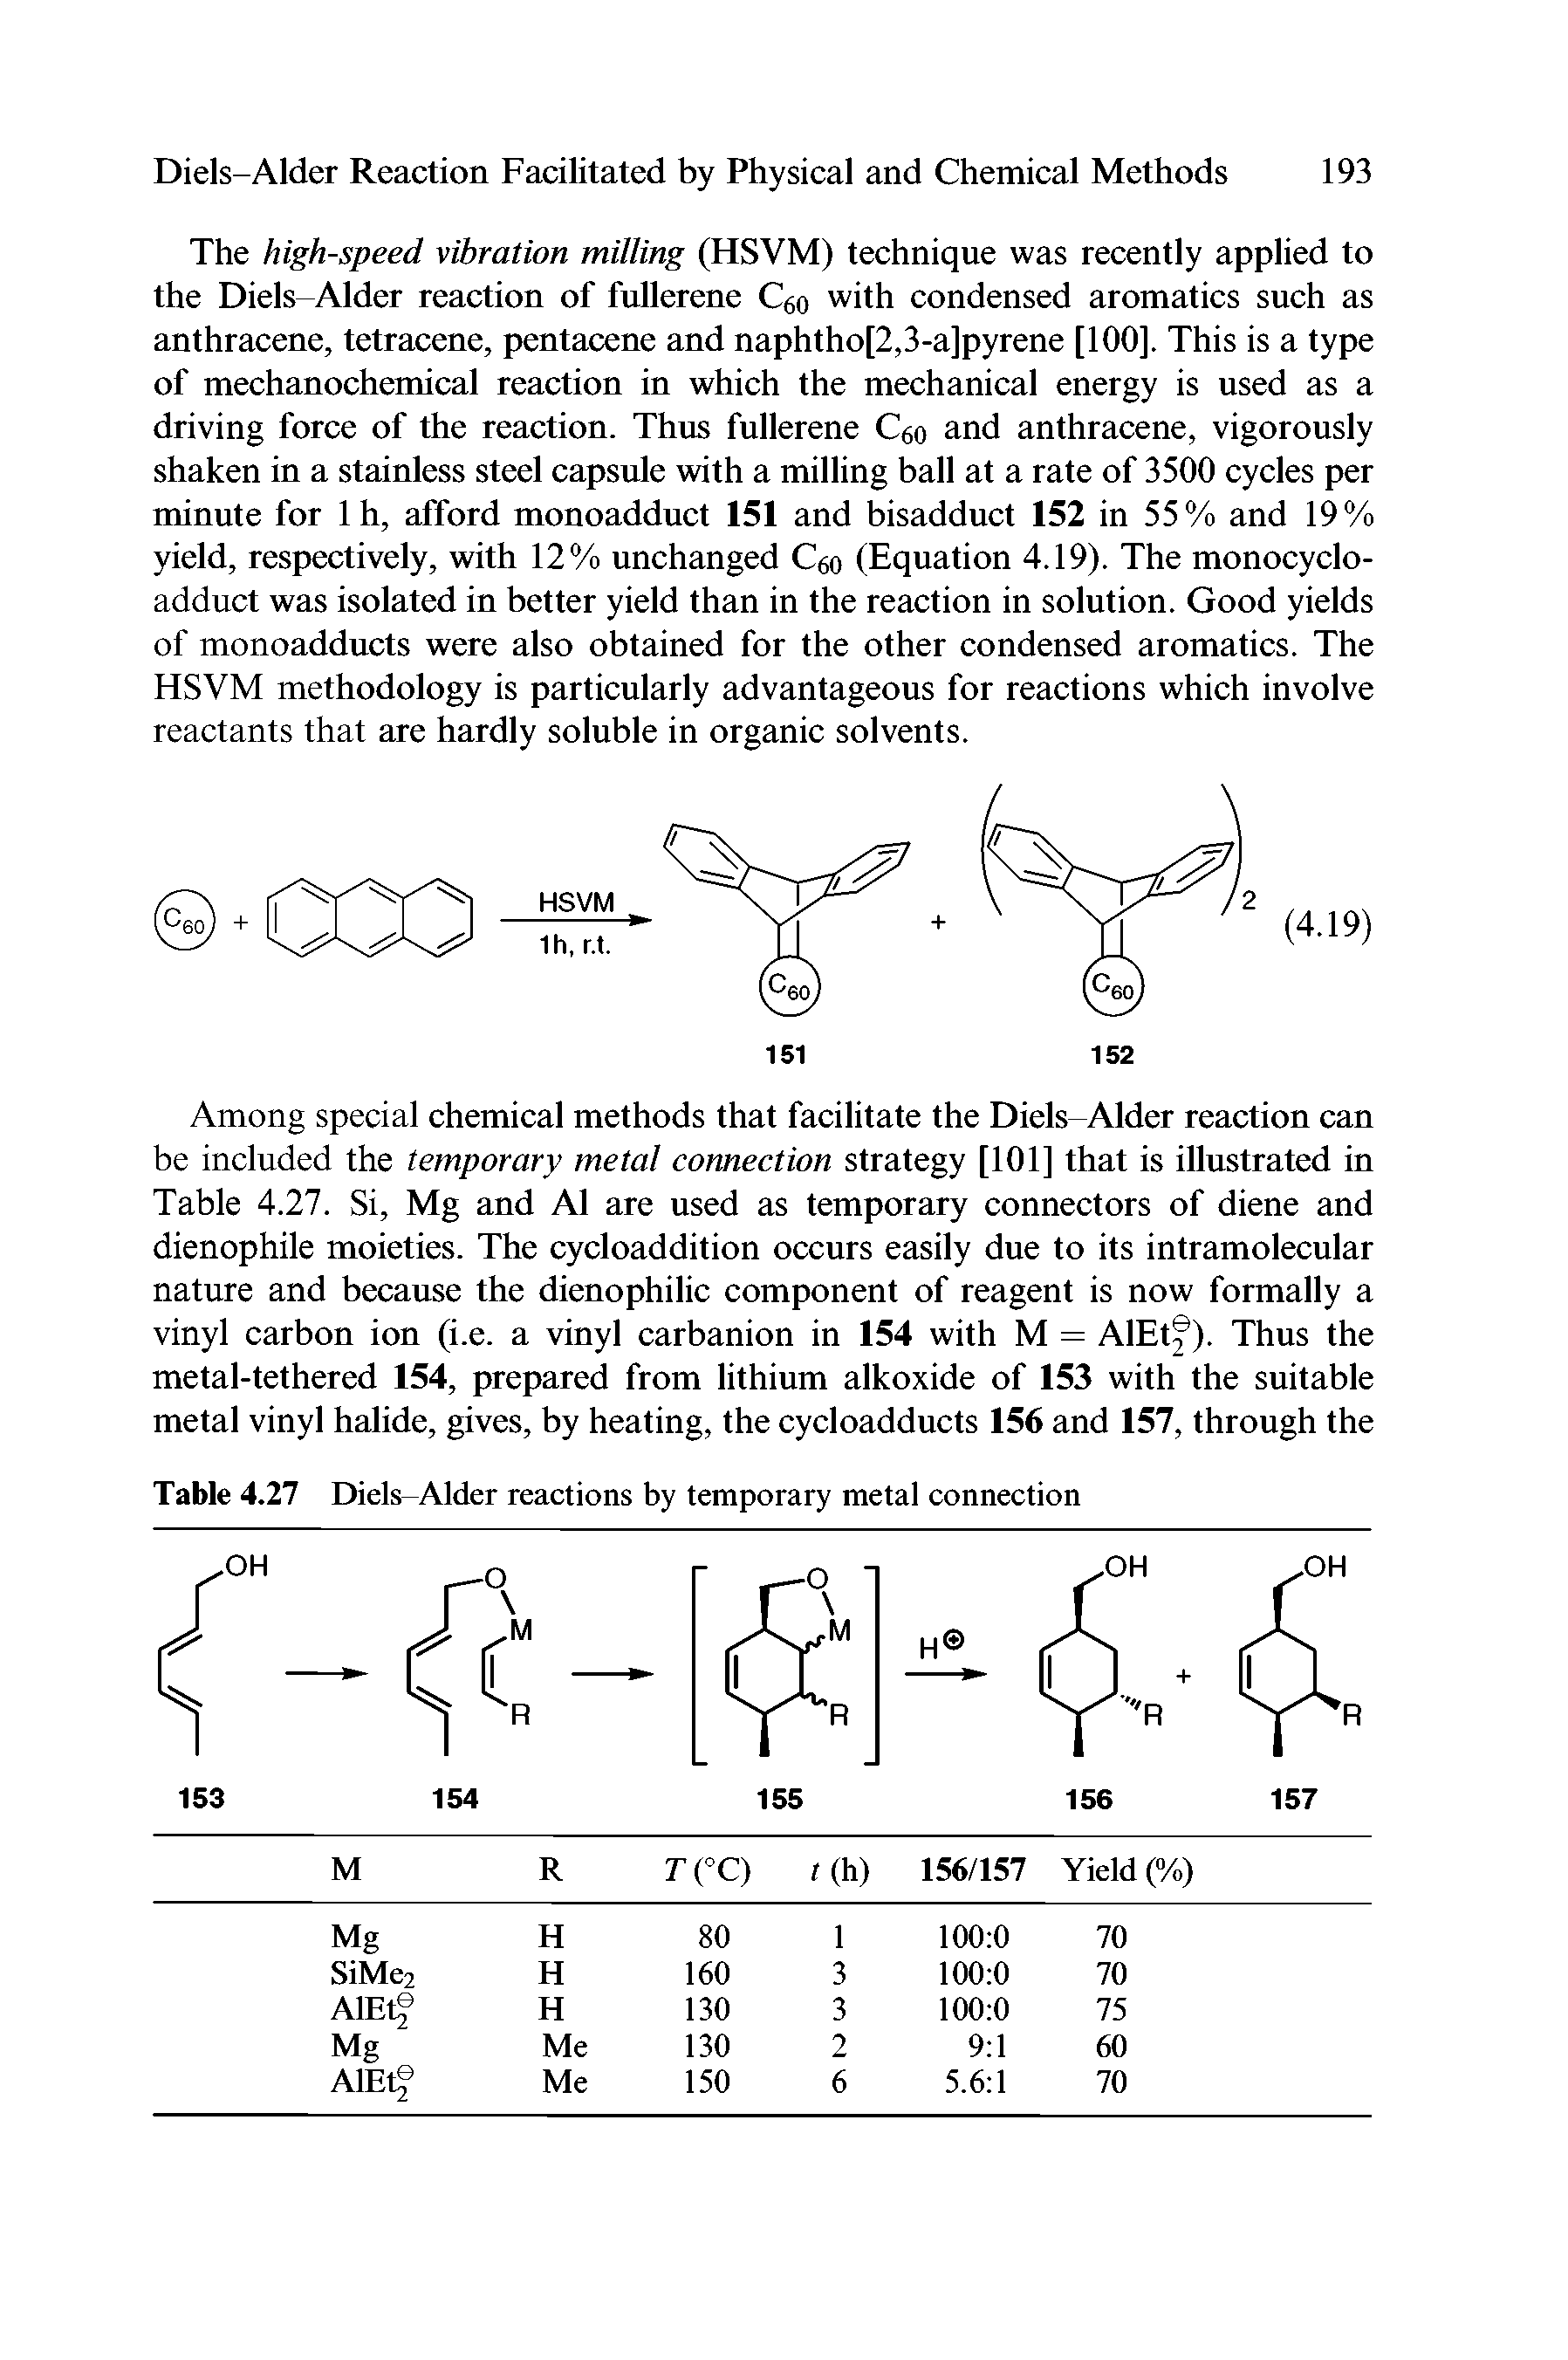 Table 4.27 Diels-Alder reactions by temporary metal connection...